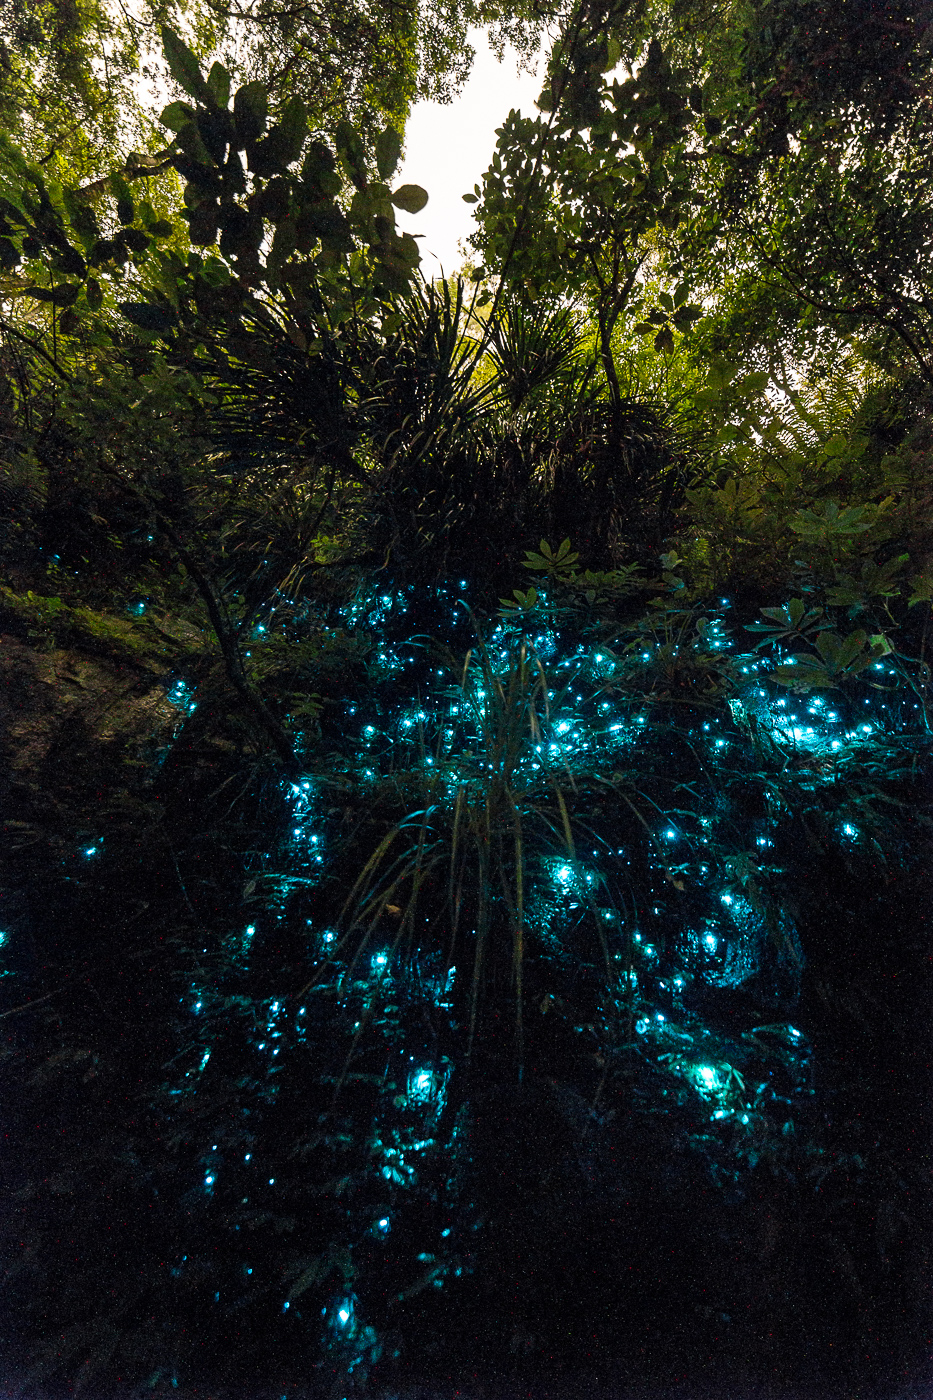 A wall of glow worms